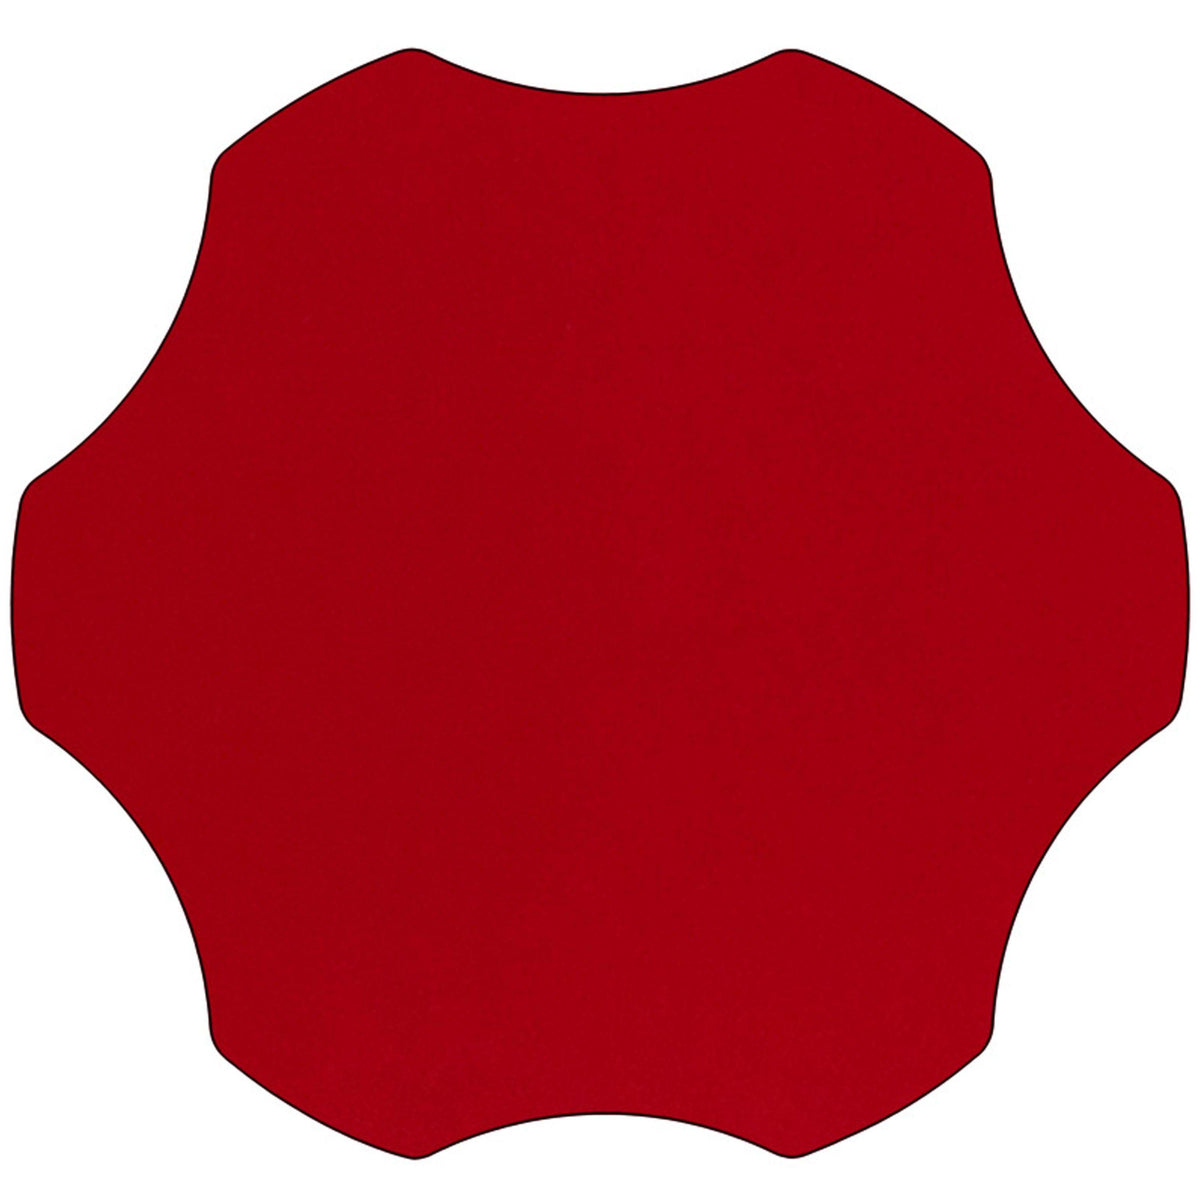 Red |#| 60inch Flower Red Thermal Laminate Activity Table - Standard Height Adjustable Legs